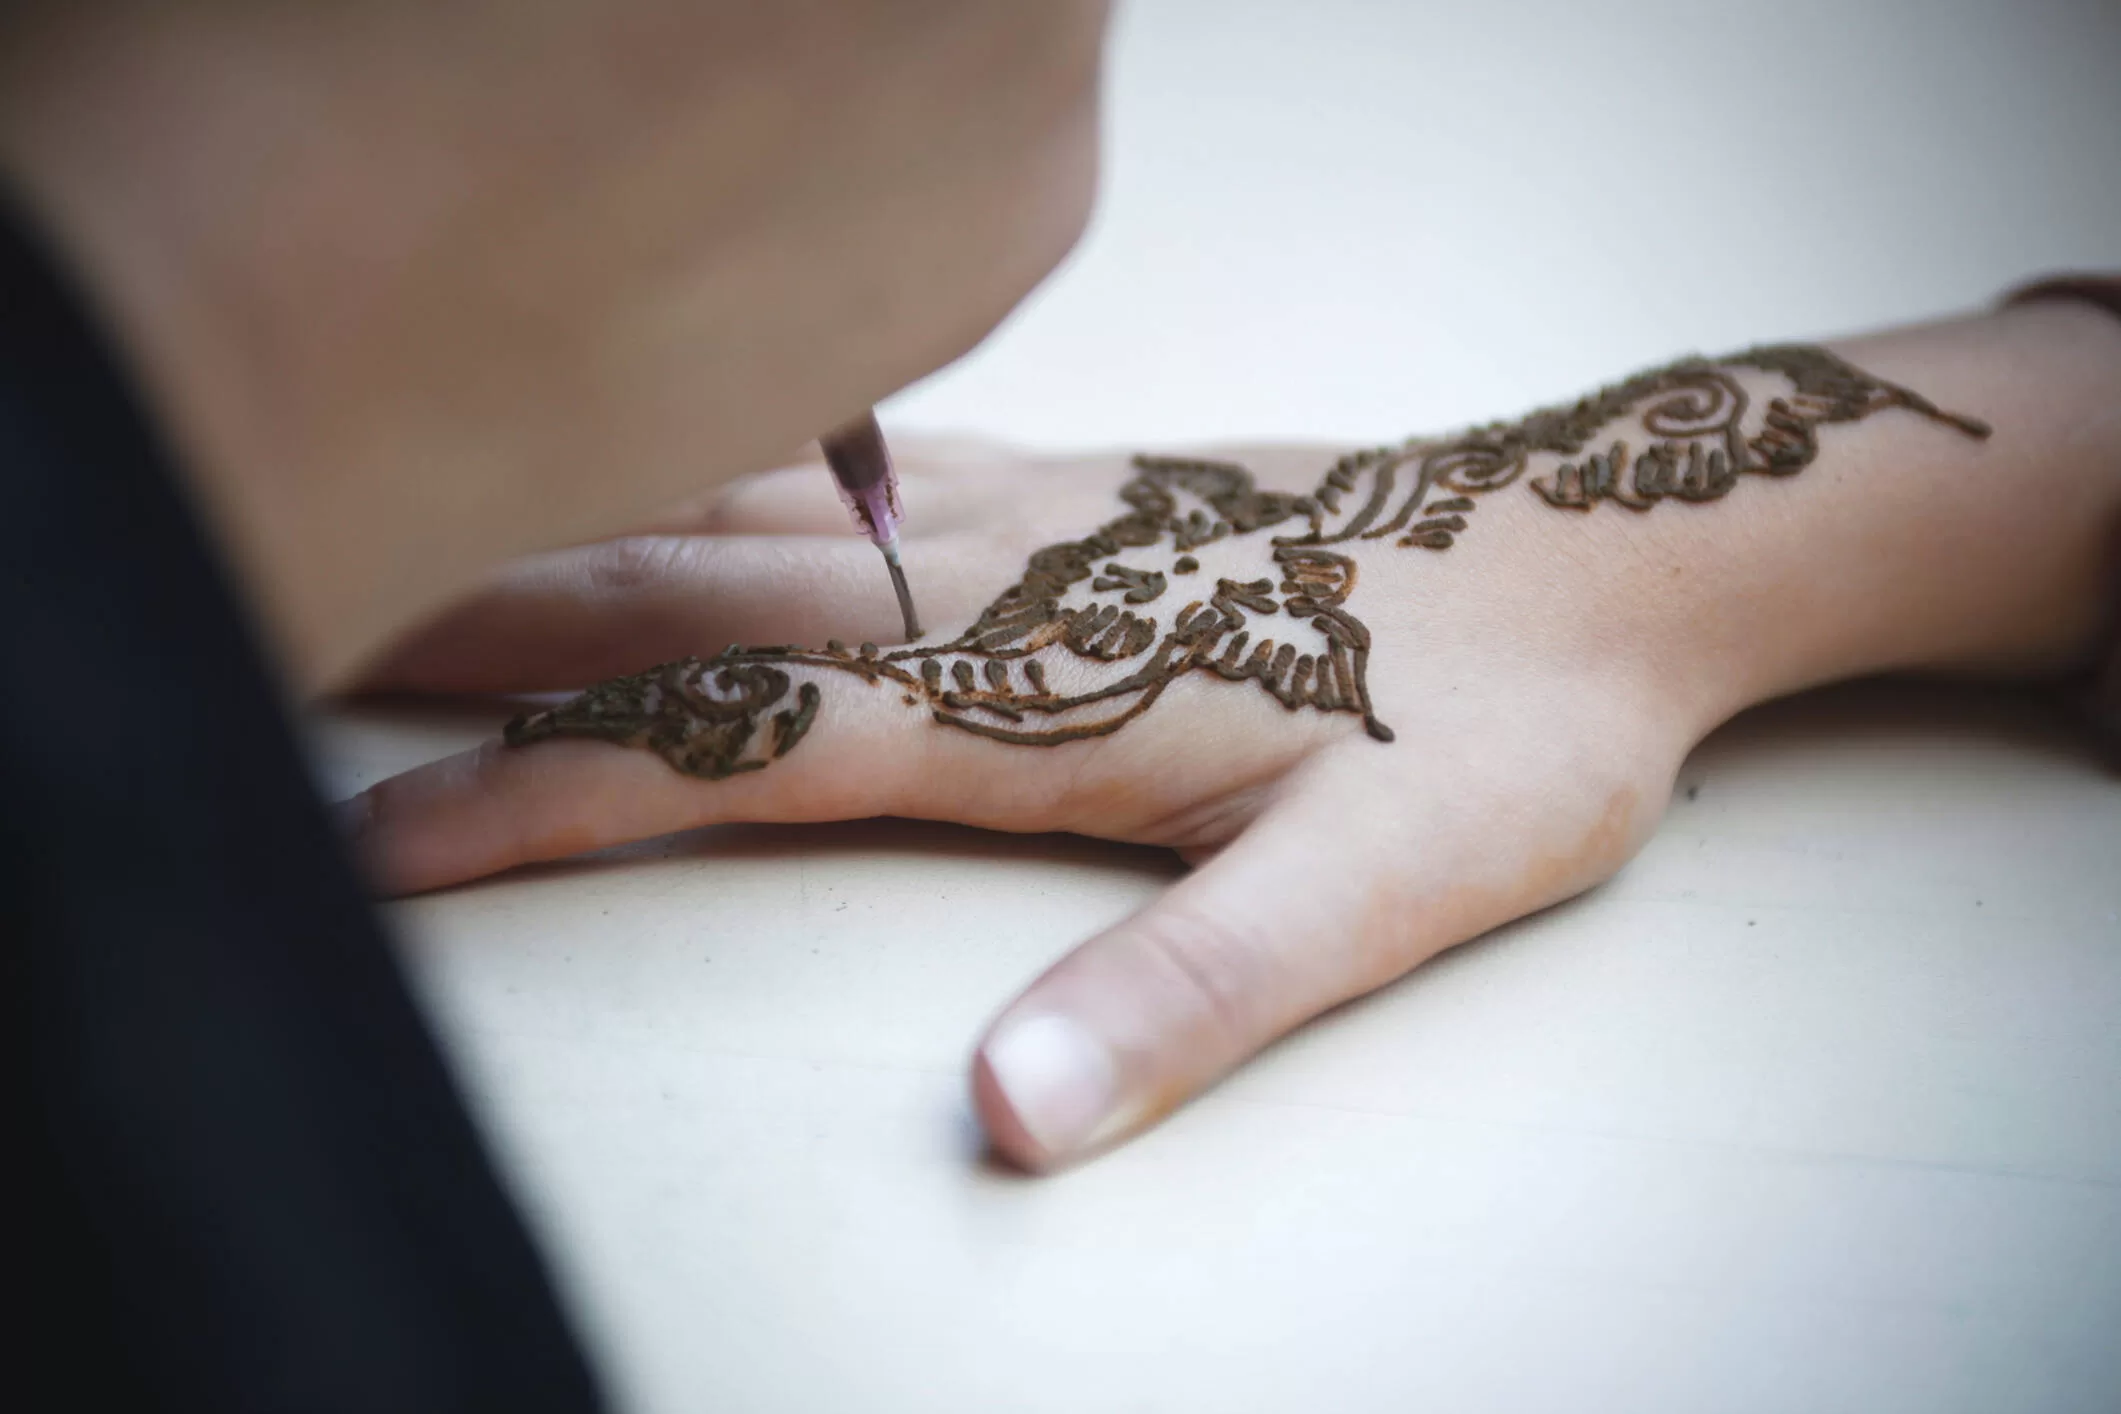 Be careful with henna tattoos: they can cause serious skin reactions
